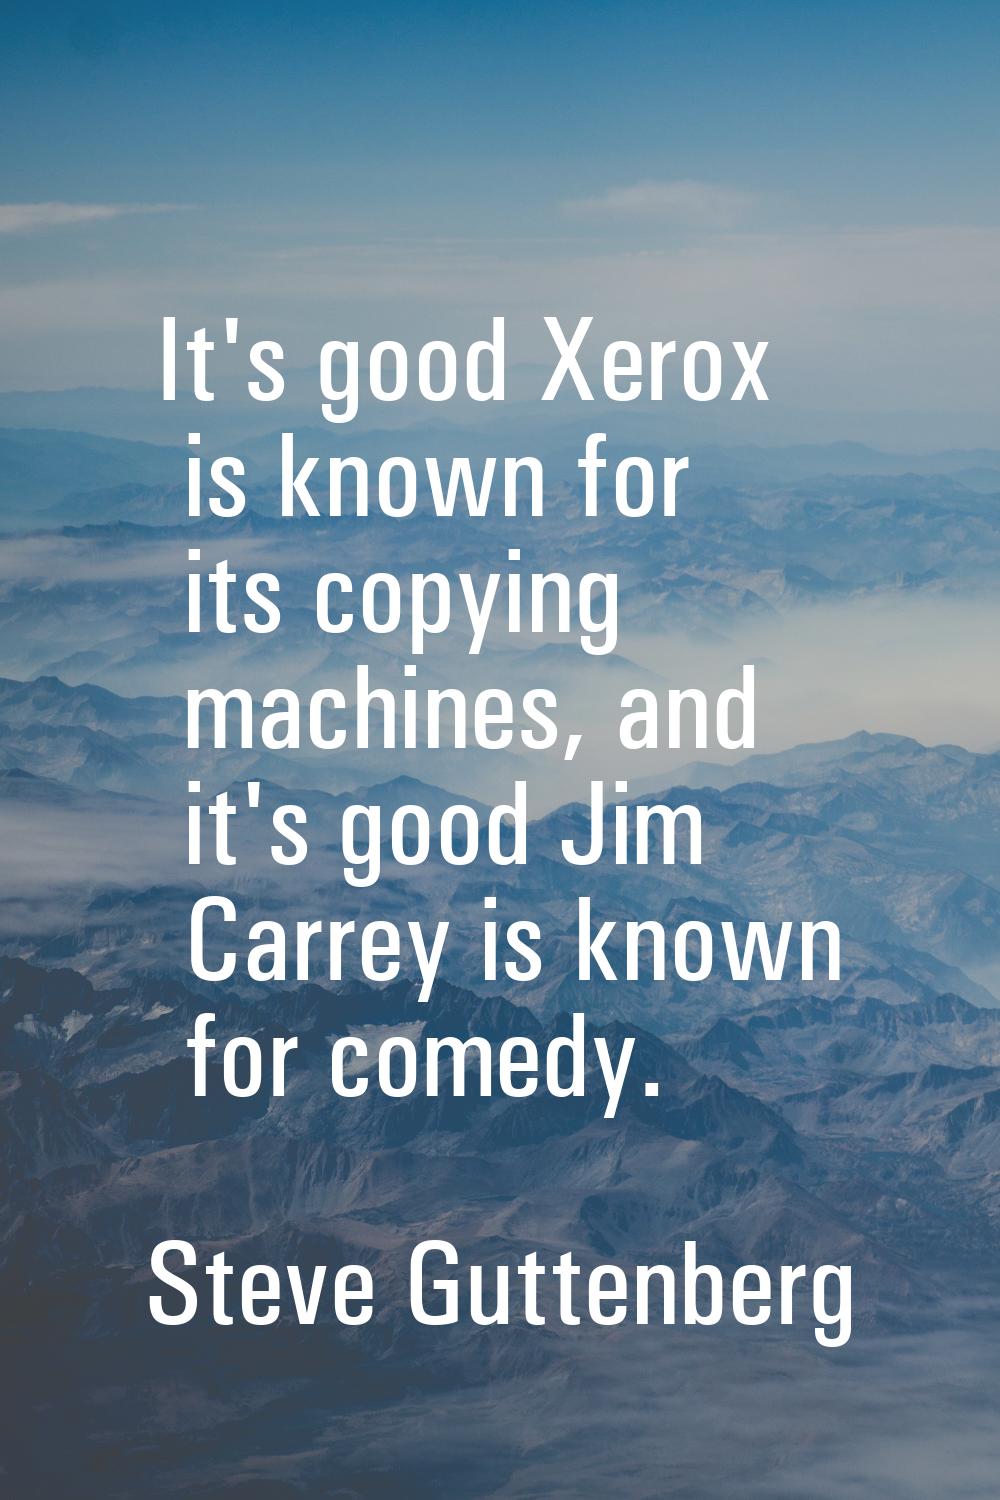 It's good Xerox is known for its copying machines, and it's good Jim Carrey is known for comedy.